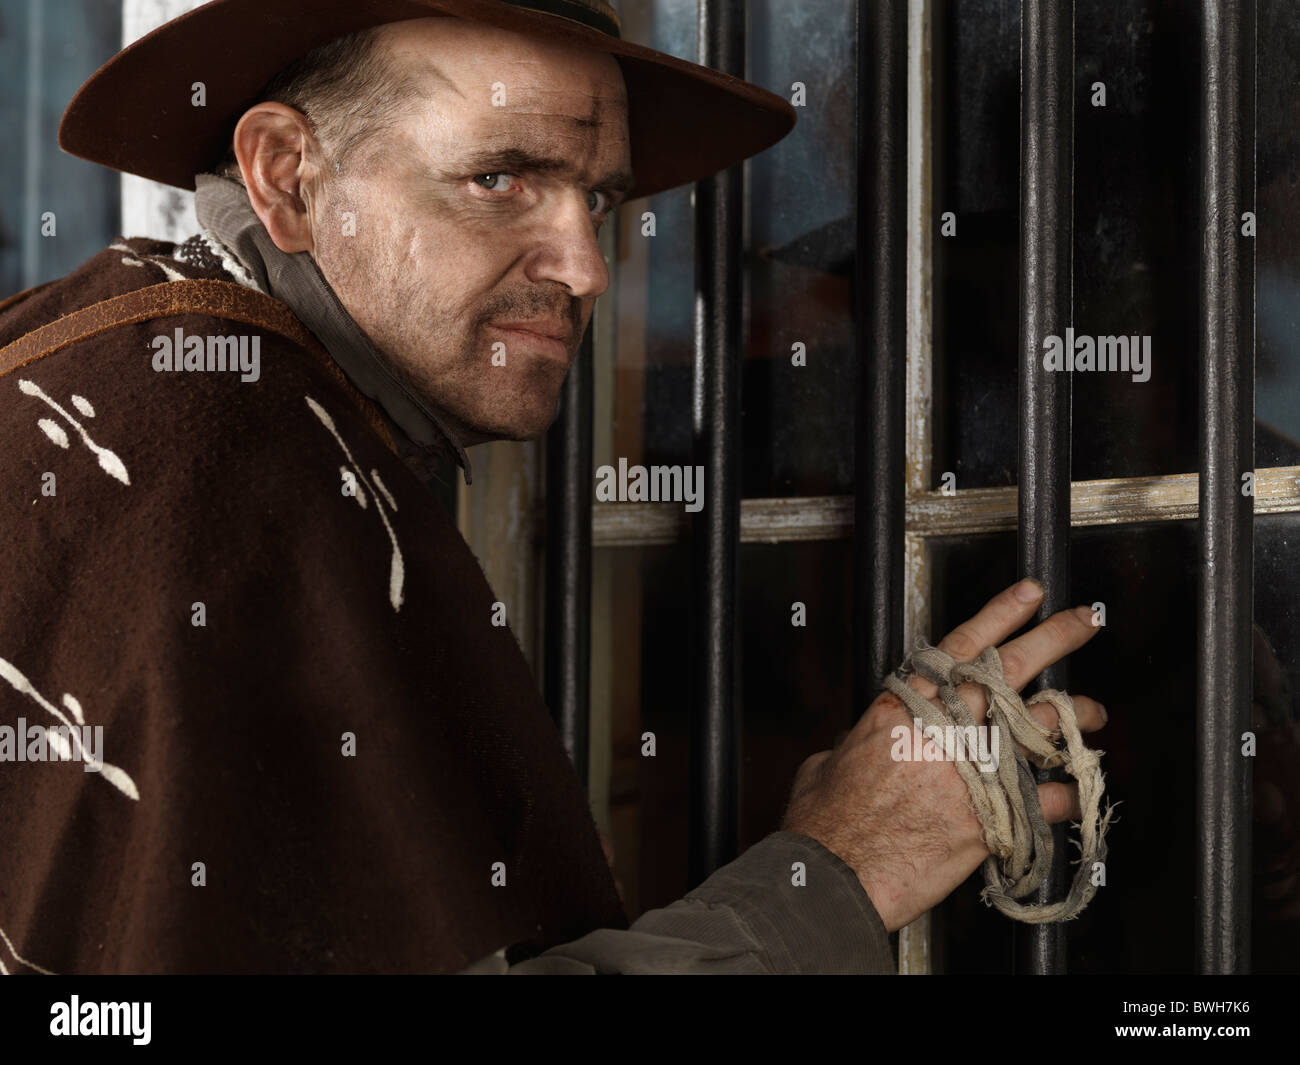 Cowboy standing at a barred window, attempting to rob a bank at night Stock Photo